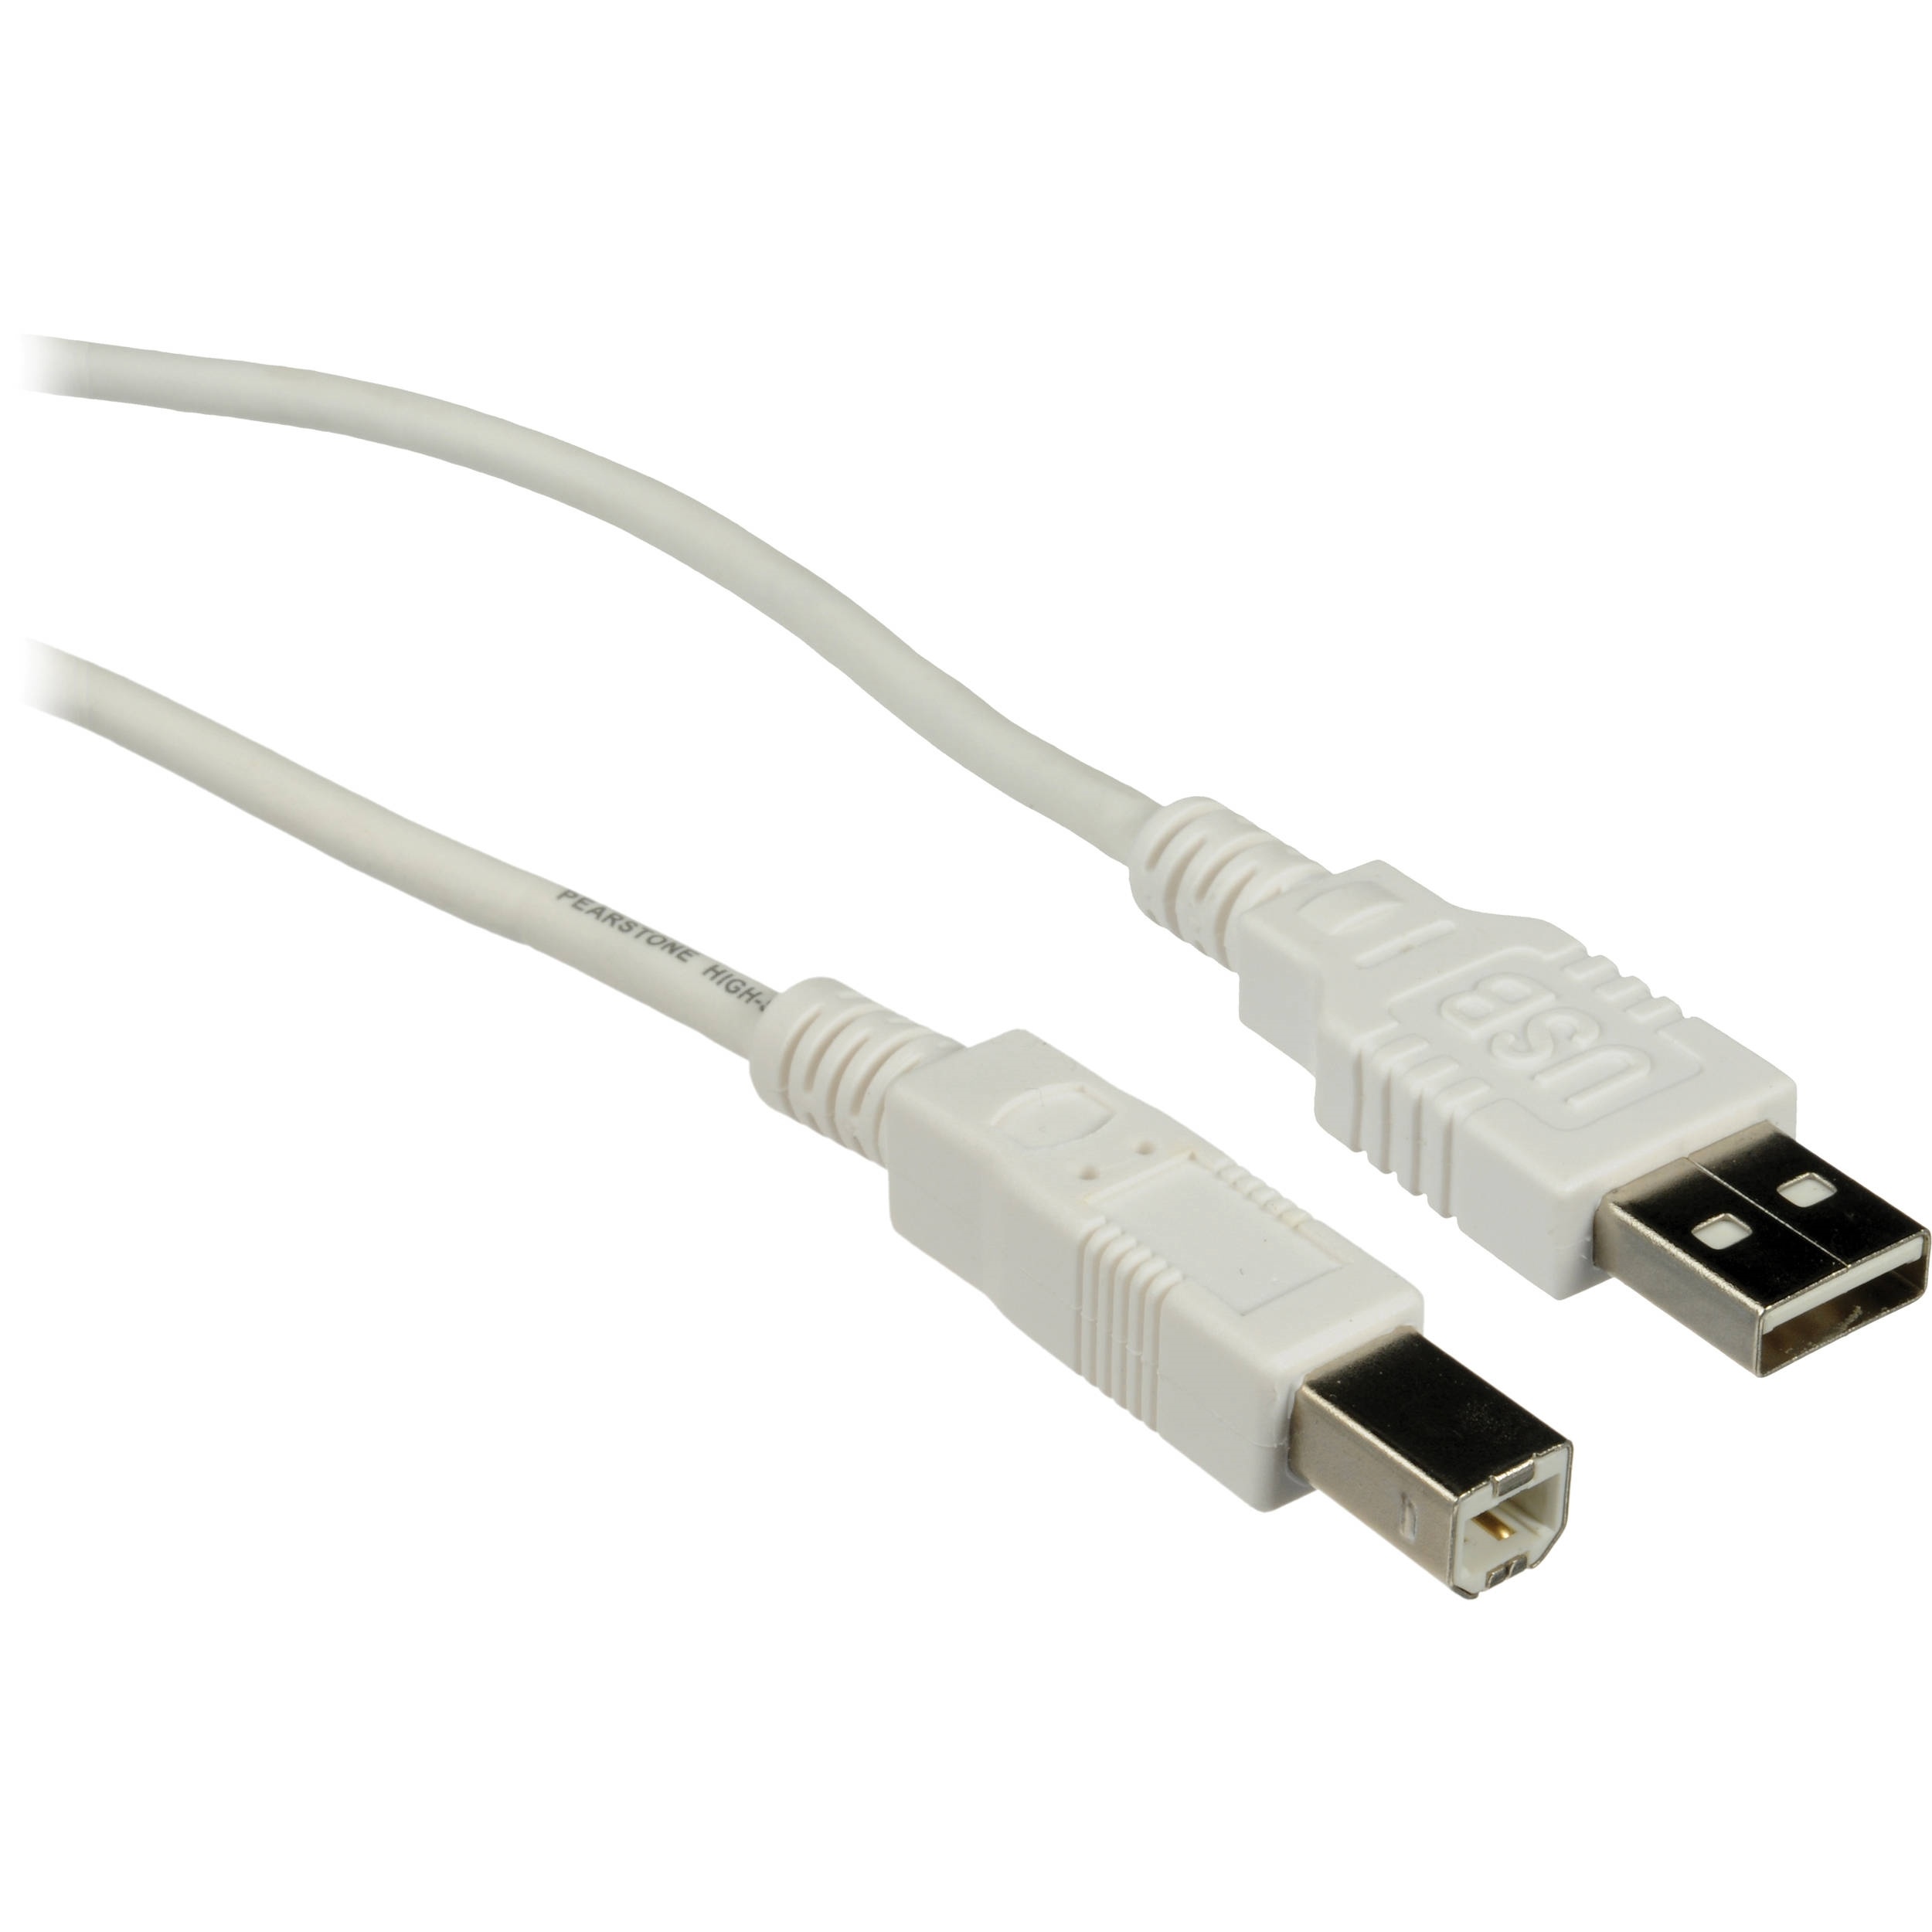 Pearstone USB 2.0 Type A Male to Type B Male Cable (White) - 6' (1.8 m)